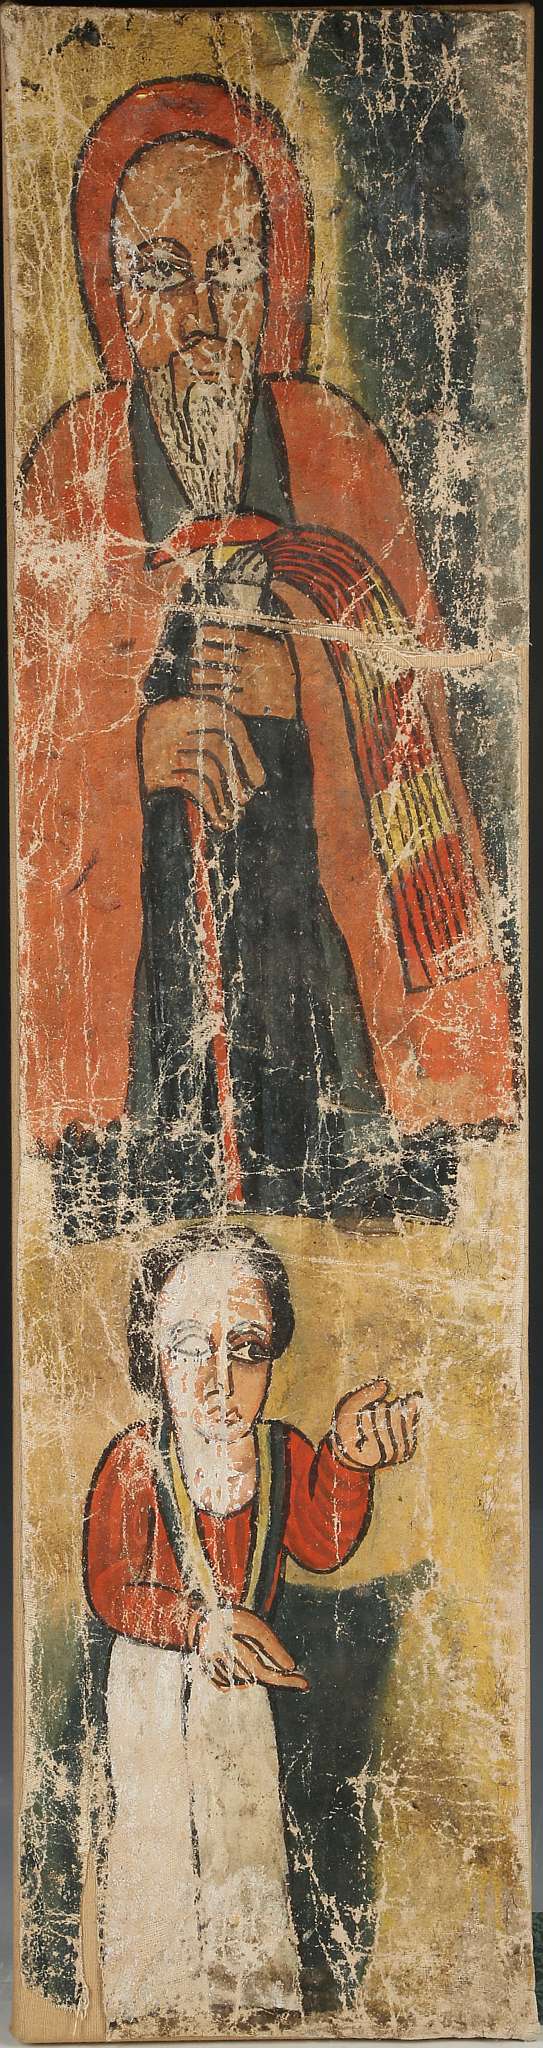 19th Century Ethiopian coptic painting, study of a saint holding fly whisk and stick, standing above